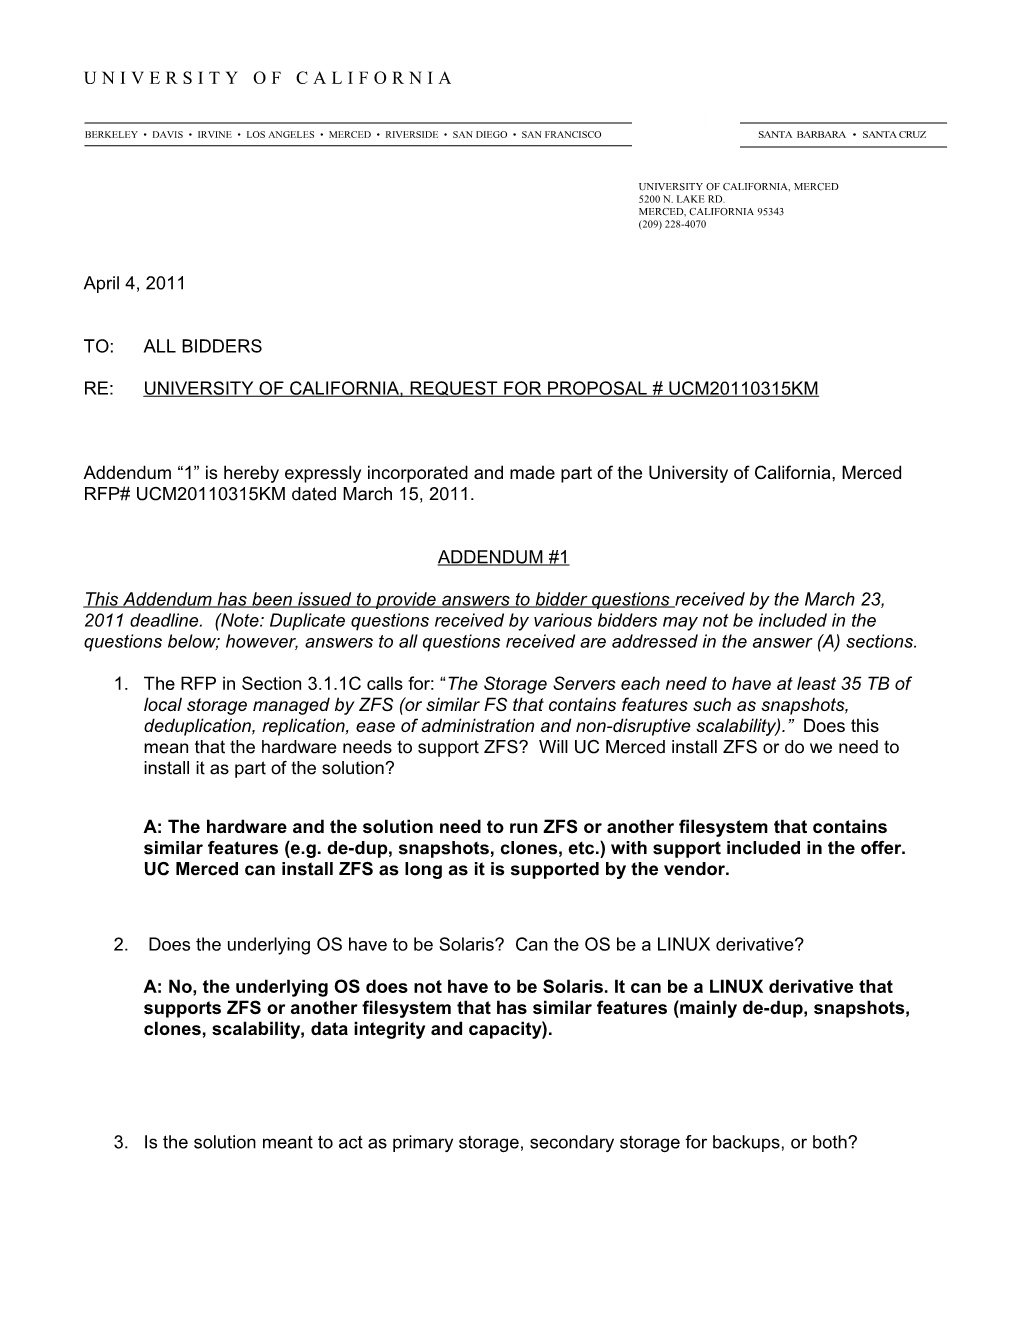 Re: University of California, Request for Proposal # Ucm20110315km